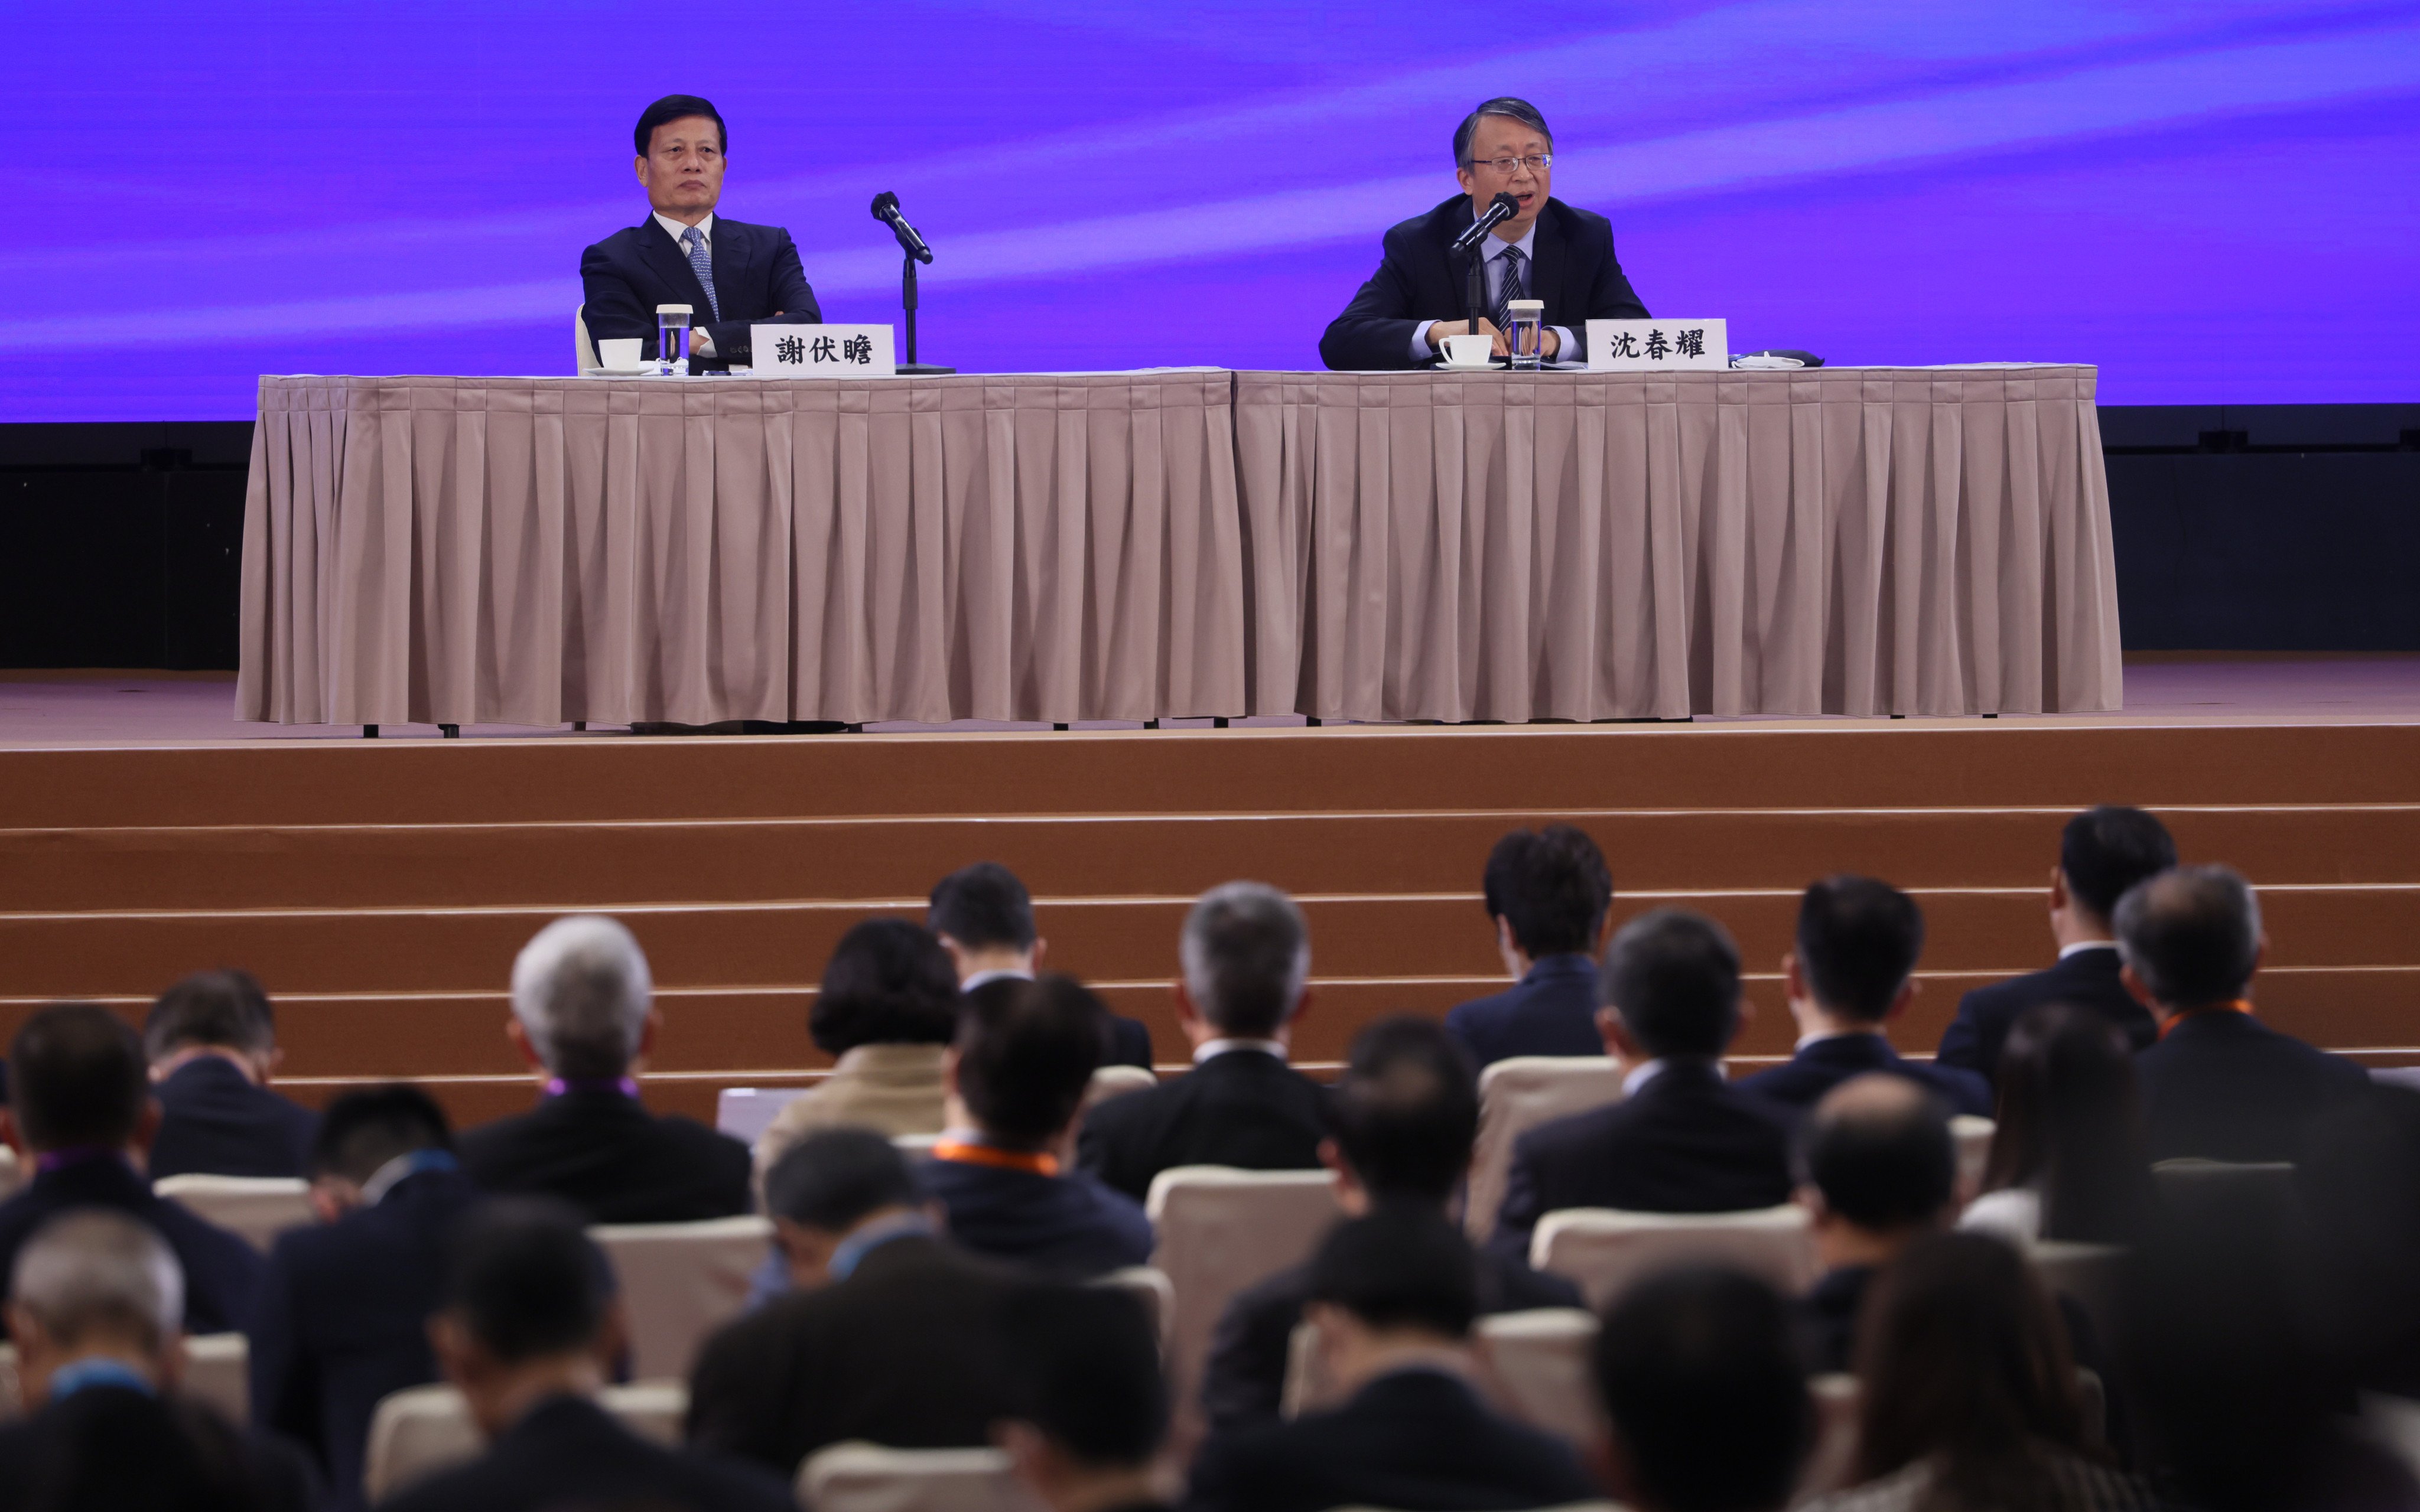 Xie Fuzhan (left), vice-chairman for the Committee on Economic Affairs of the Chinese People’s Political Consultative Conference, sits alongside Shen Chunyao, chairman of the Legislative Affairs Commission for the National People’s Congress Standing Committee. Photo: Dickson Lee.